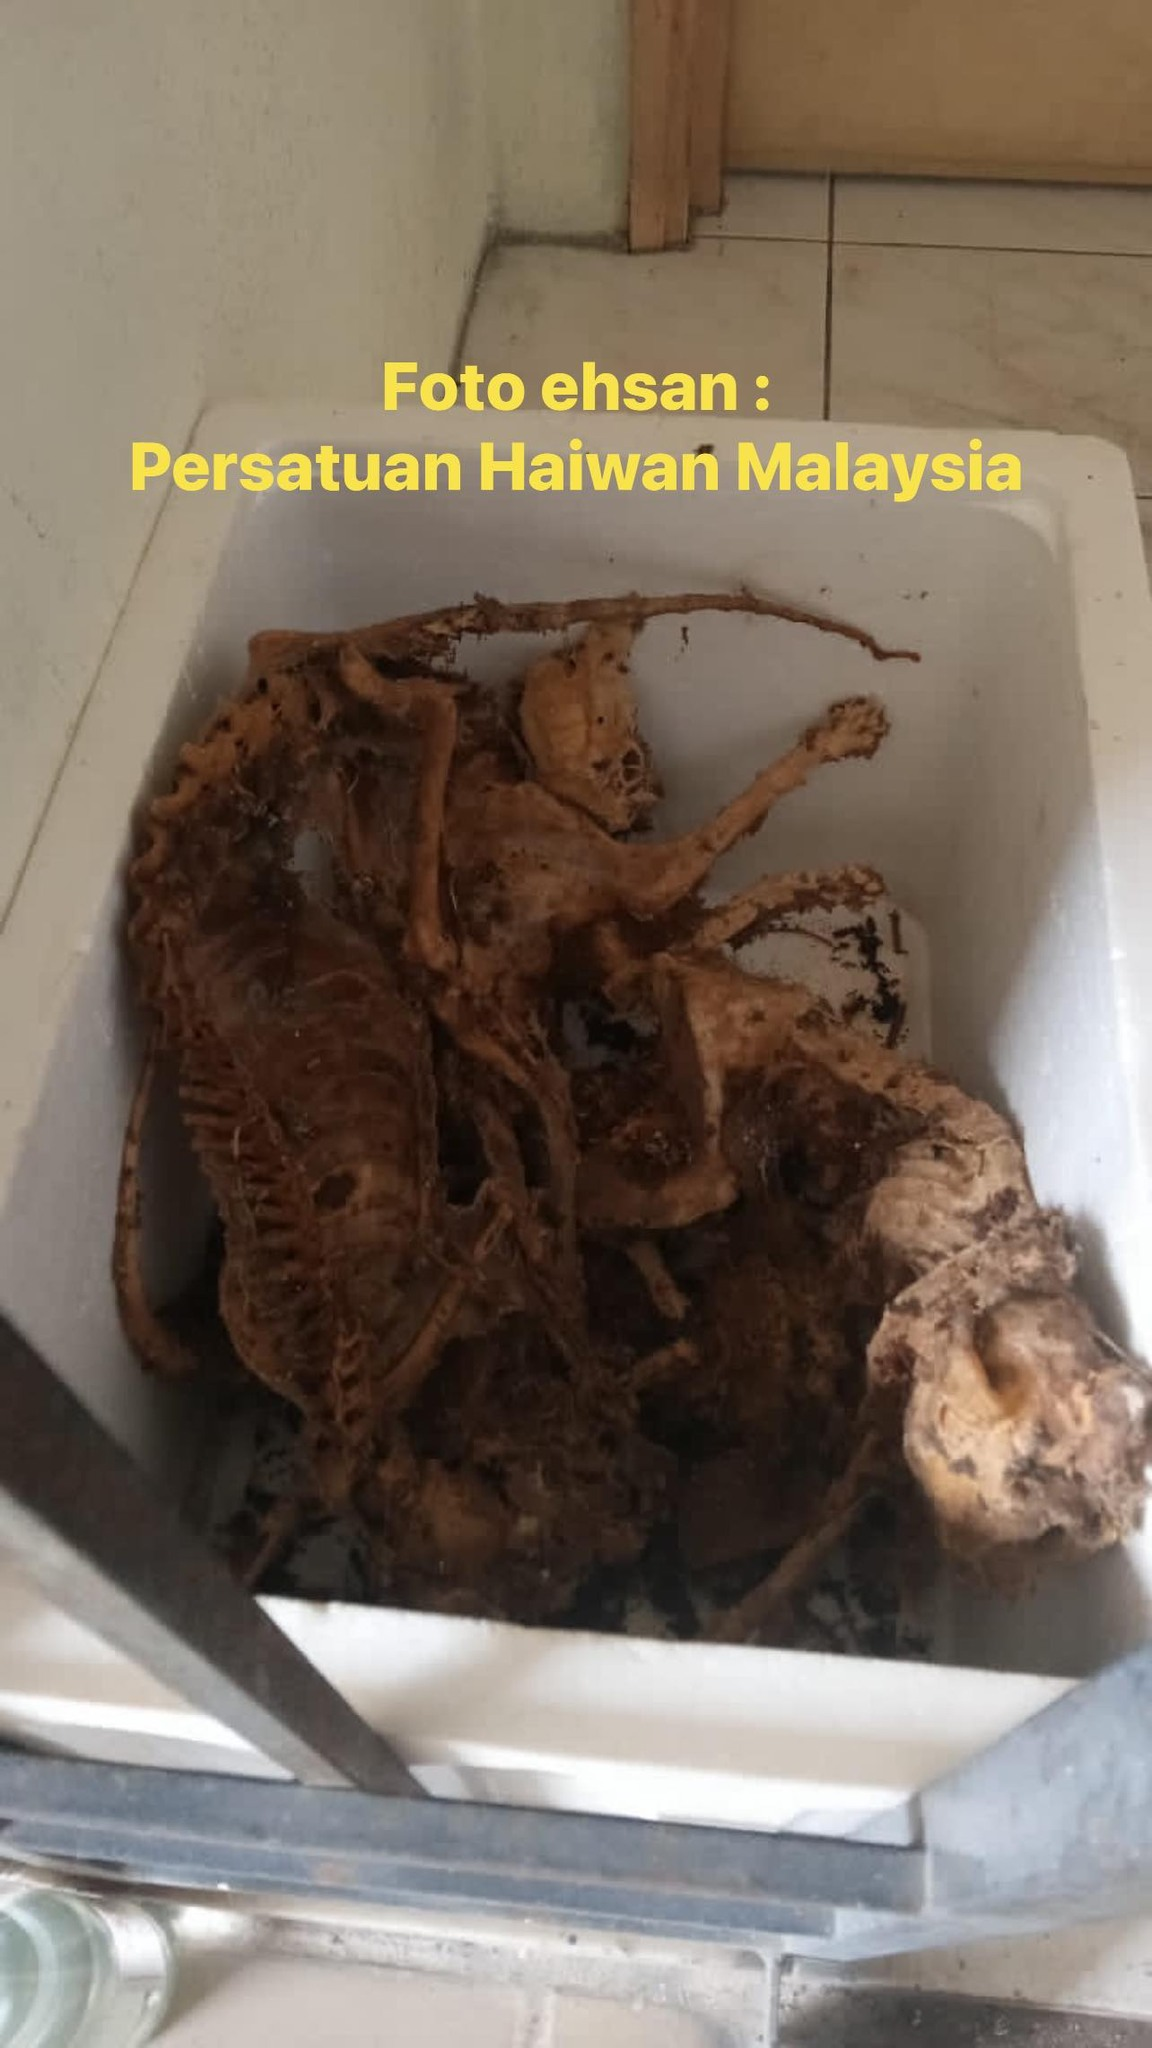 M'sian owner discovers cat carcasses and organs at cheras condo, 31yo tenant arrested